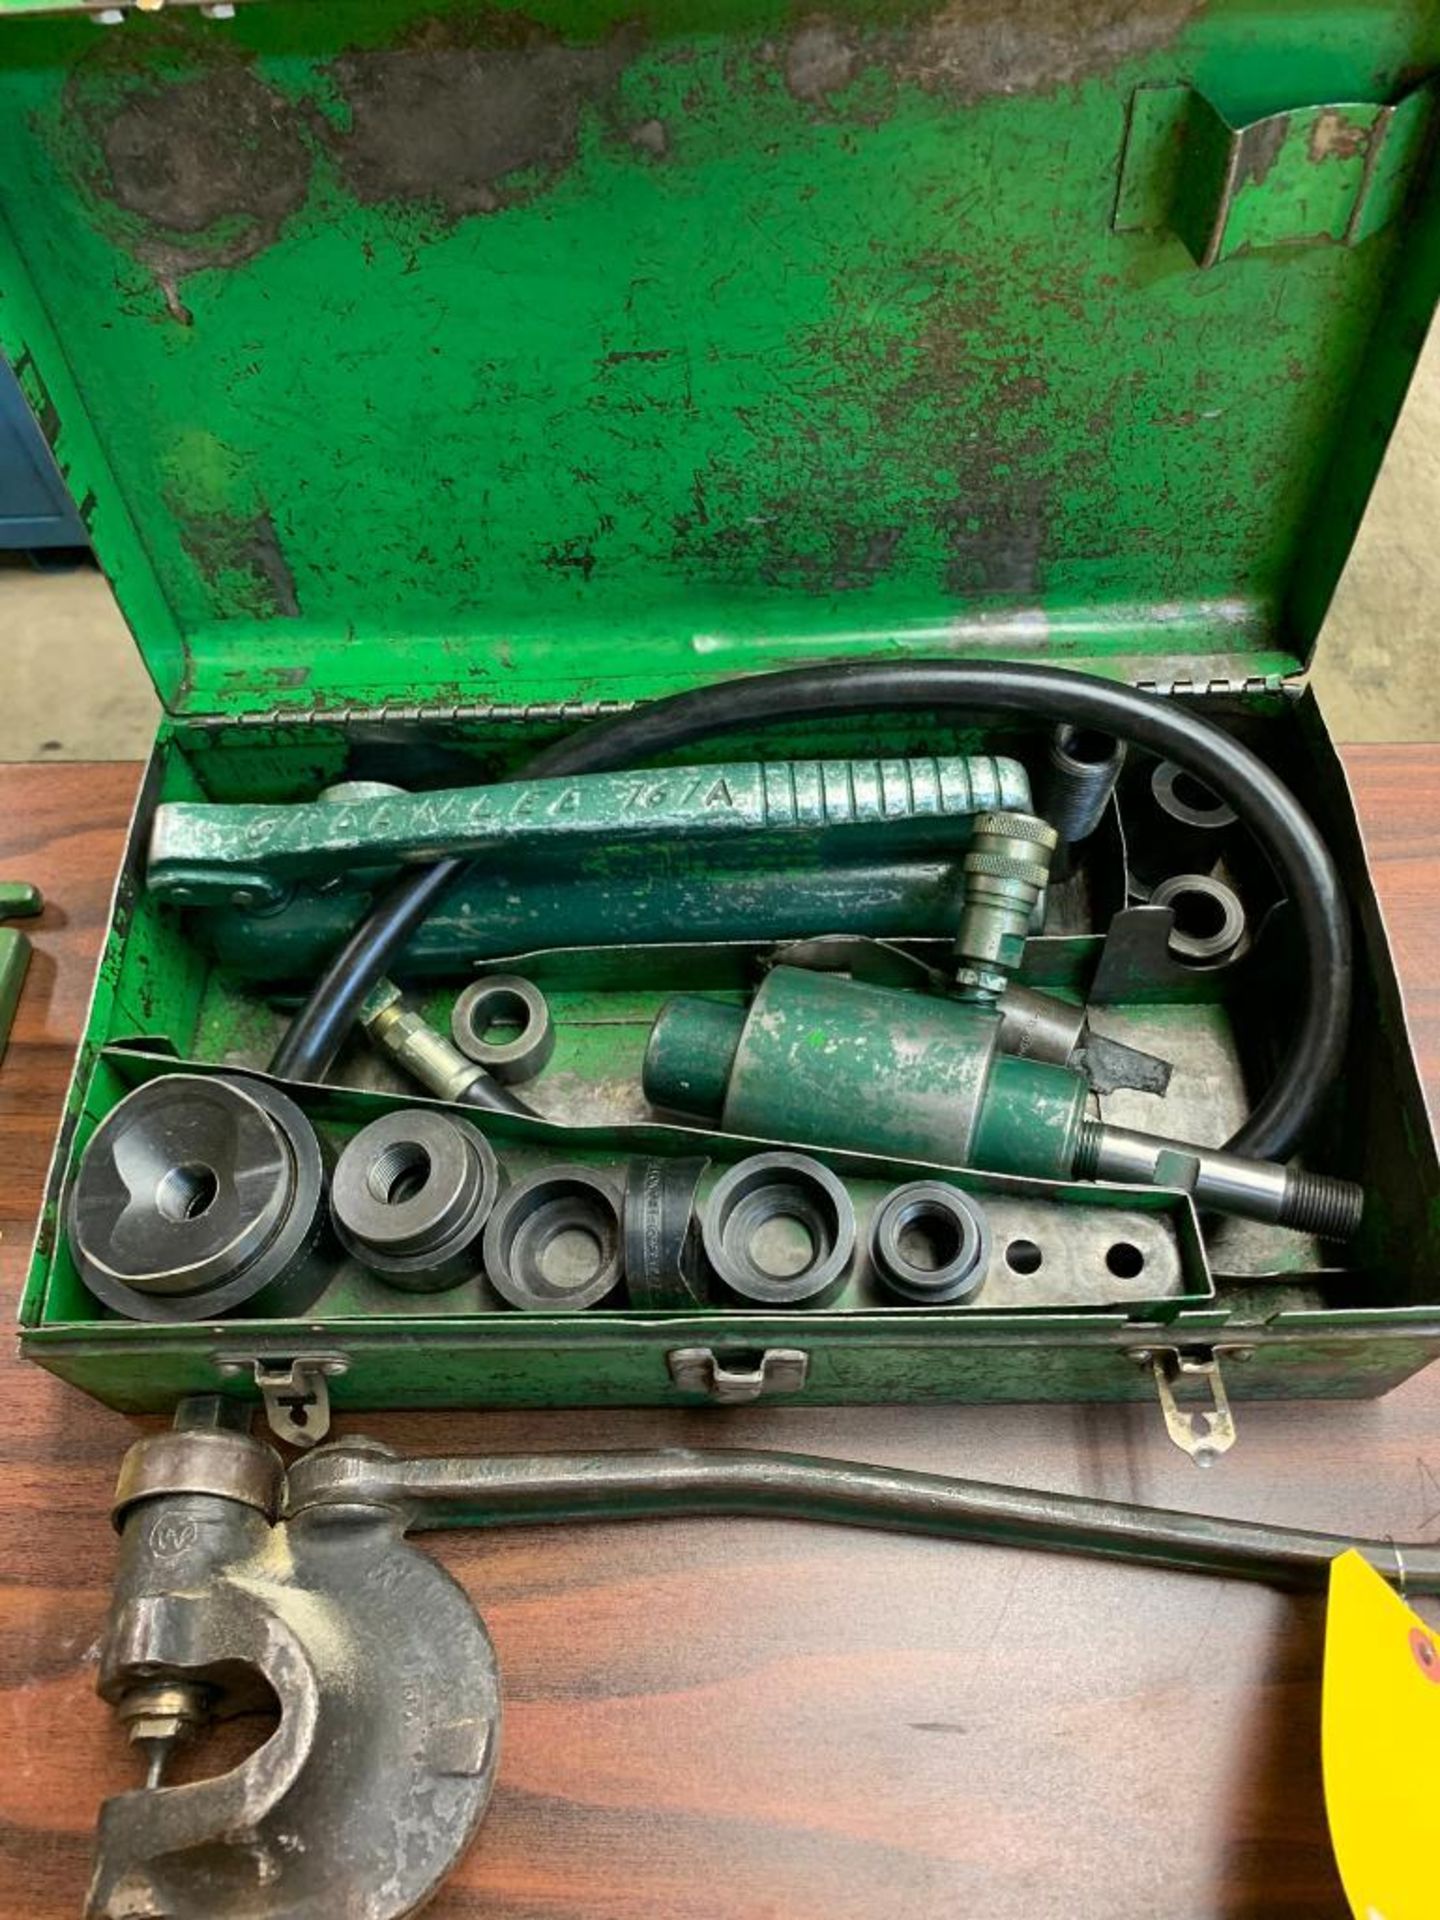 Greenlee Knock-Out Punch Set, Model 767A, Hyd. Hand Pump